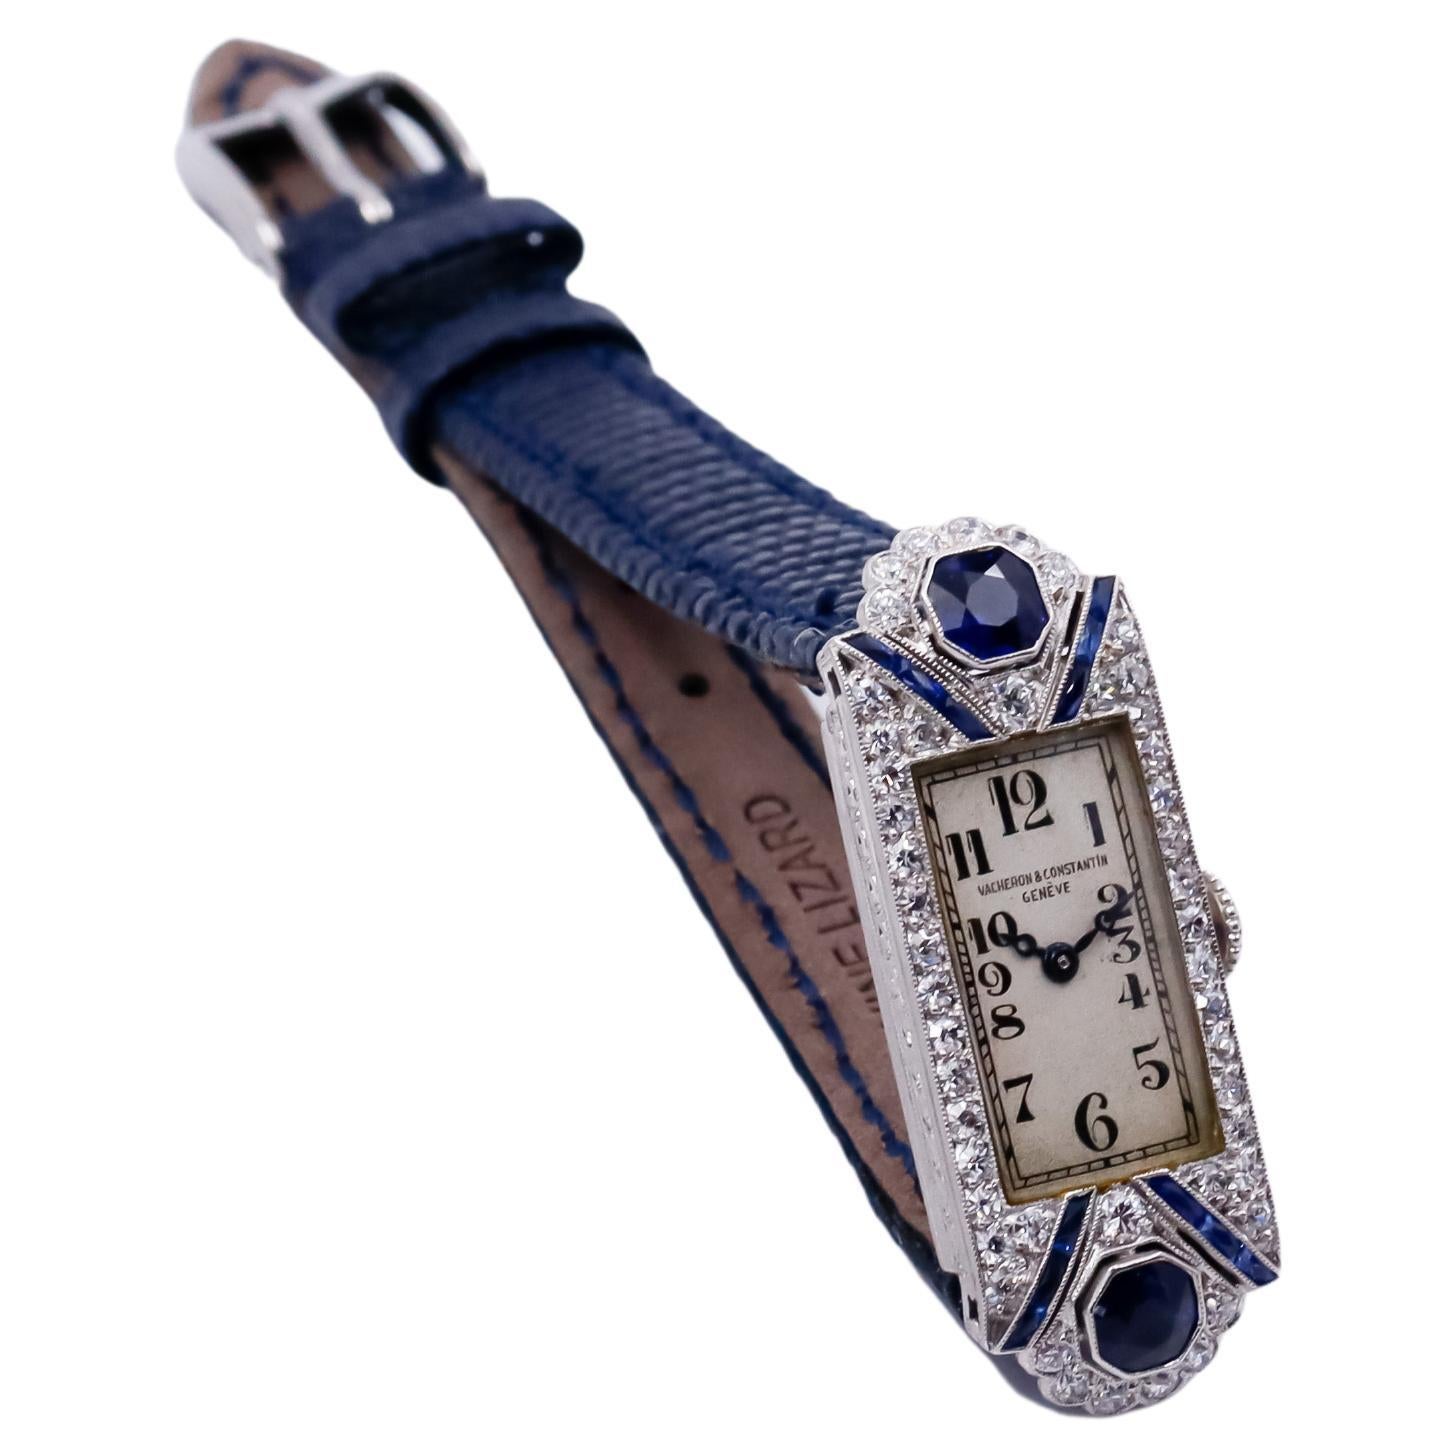 Vacheron Constantin Platinum and Diamond Dress Watch with Ceylon Sapphires, 1920 In Excellent Condition For Sale In Long Beach, CA